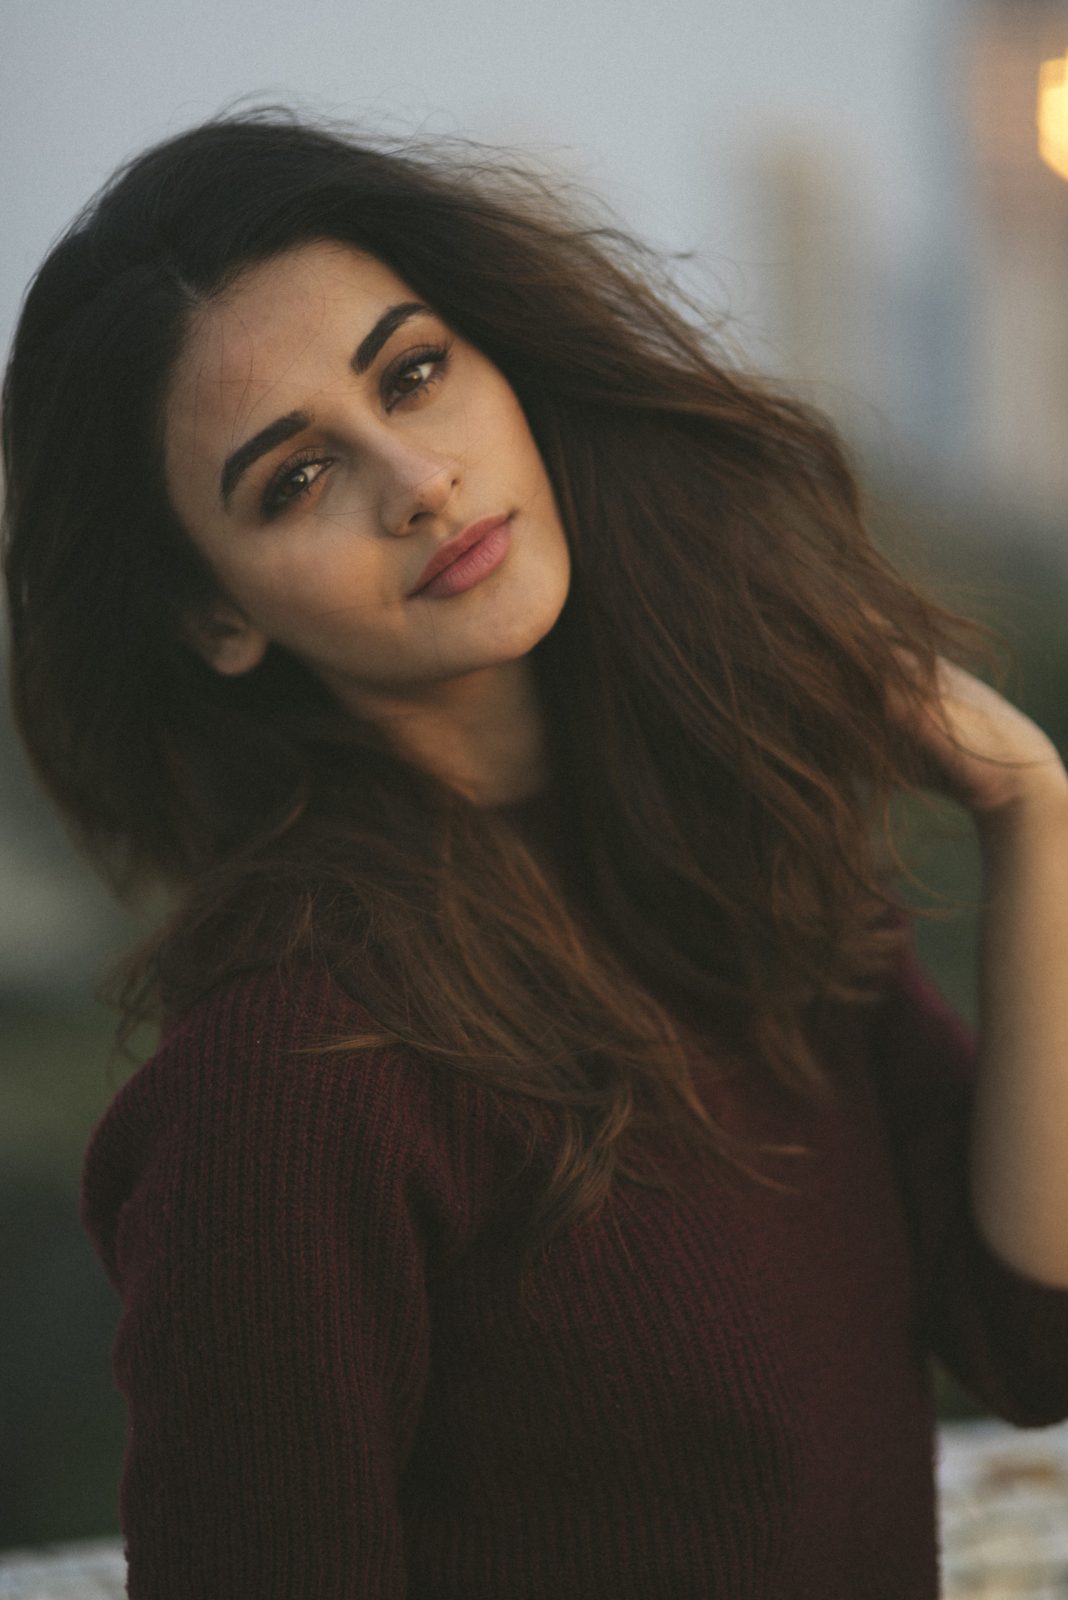 I want all of us girls to empower each other say's Aditi Arya 12